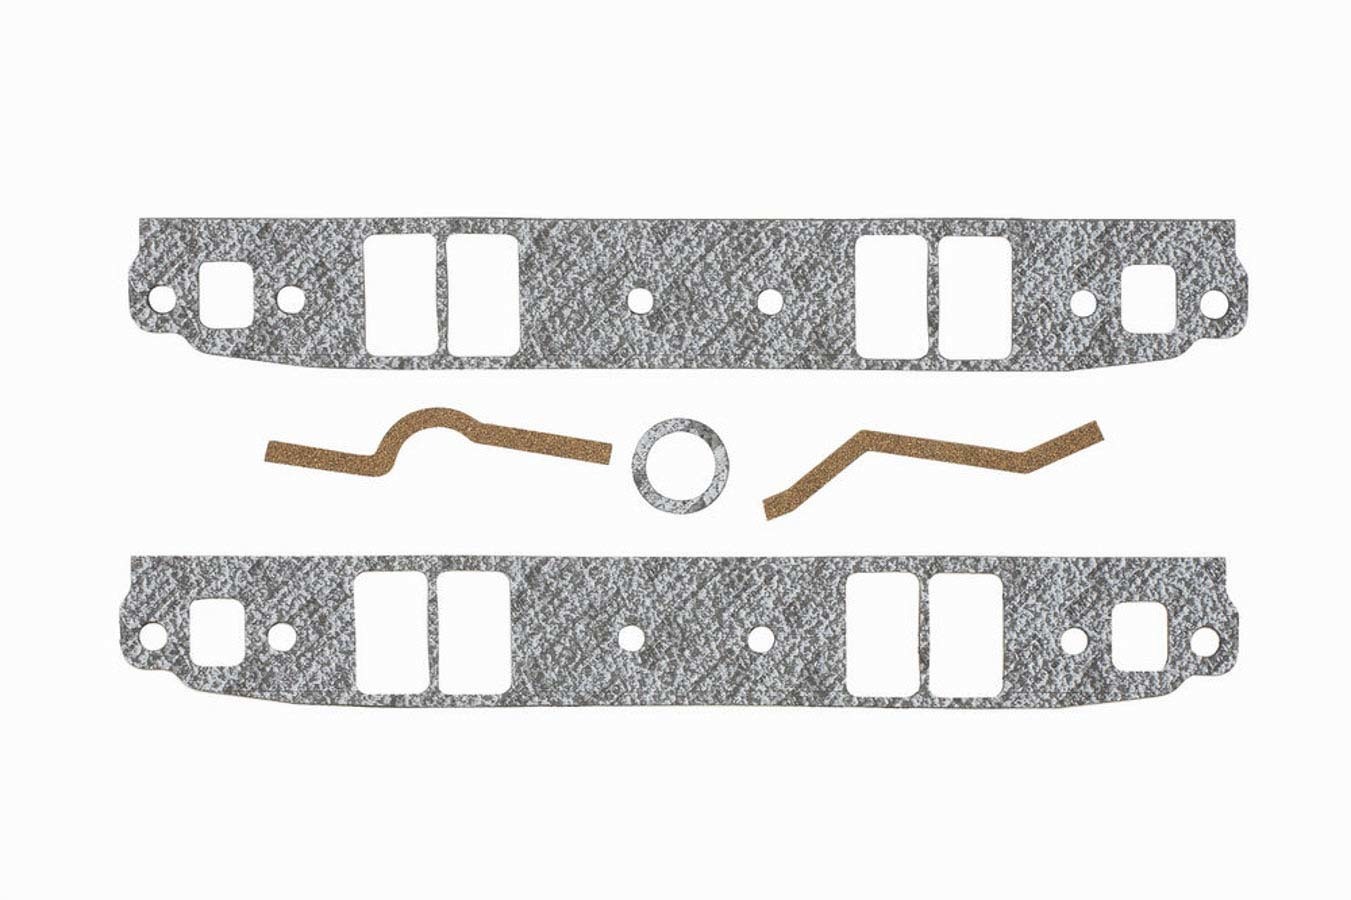 Mr. Gasket 116 Intake Manifold Gasket, Performance, 0.120 in Thick, 1.310 x 2.190 in Rectangular Port, Composite, Small Block Chevy, Kit